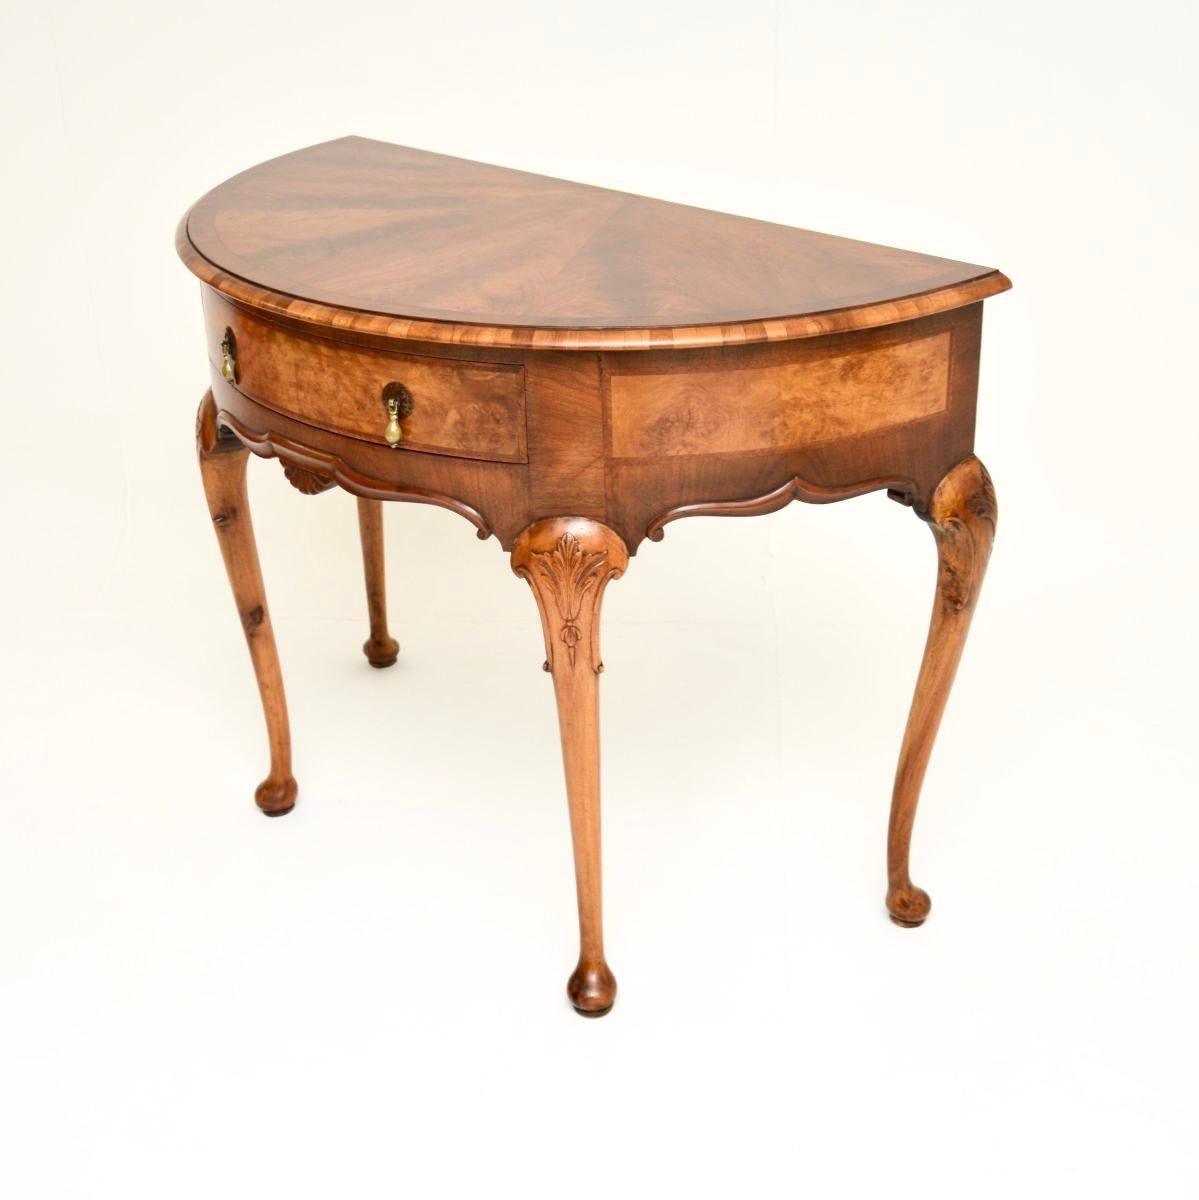 British Antique Walnut Console Table by Hamptons of Pall Mall